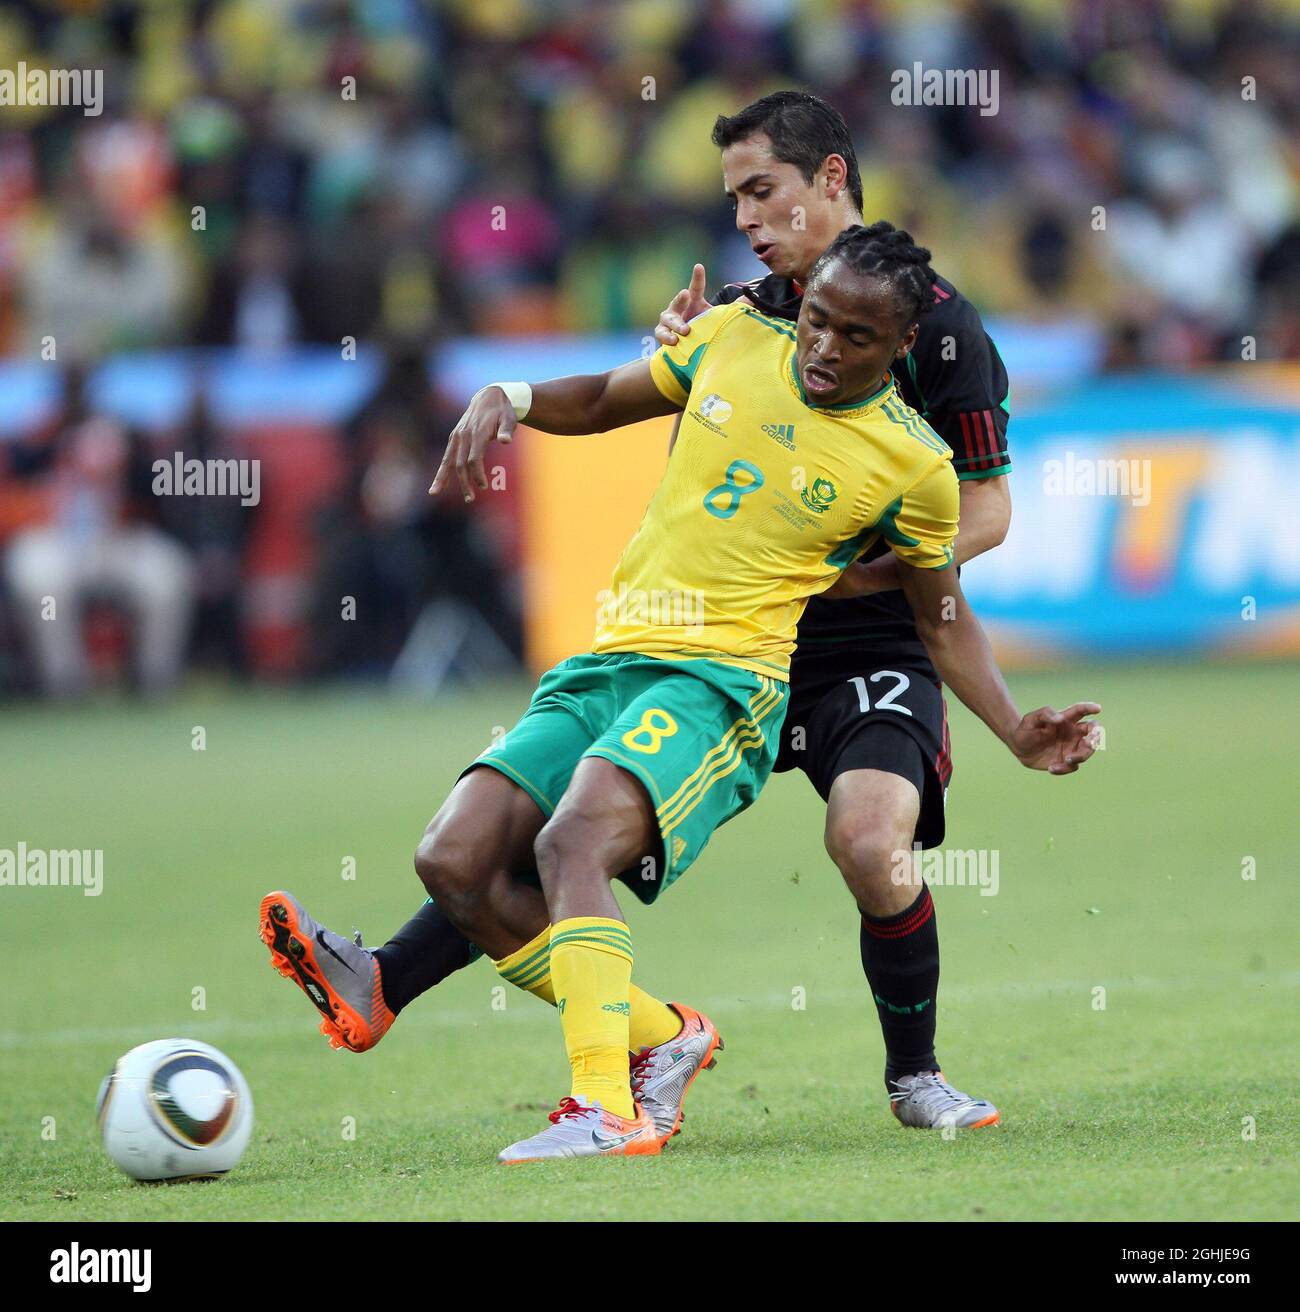 South Africa's Siphiwe Tsahabalala tussles with Mexico's Paul Aguilar. Stock Photo